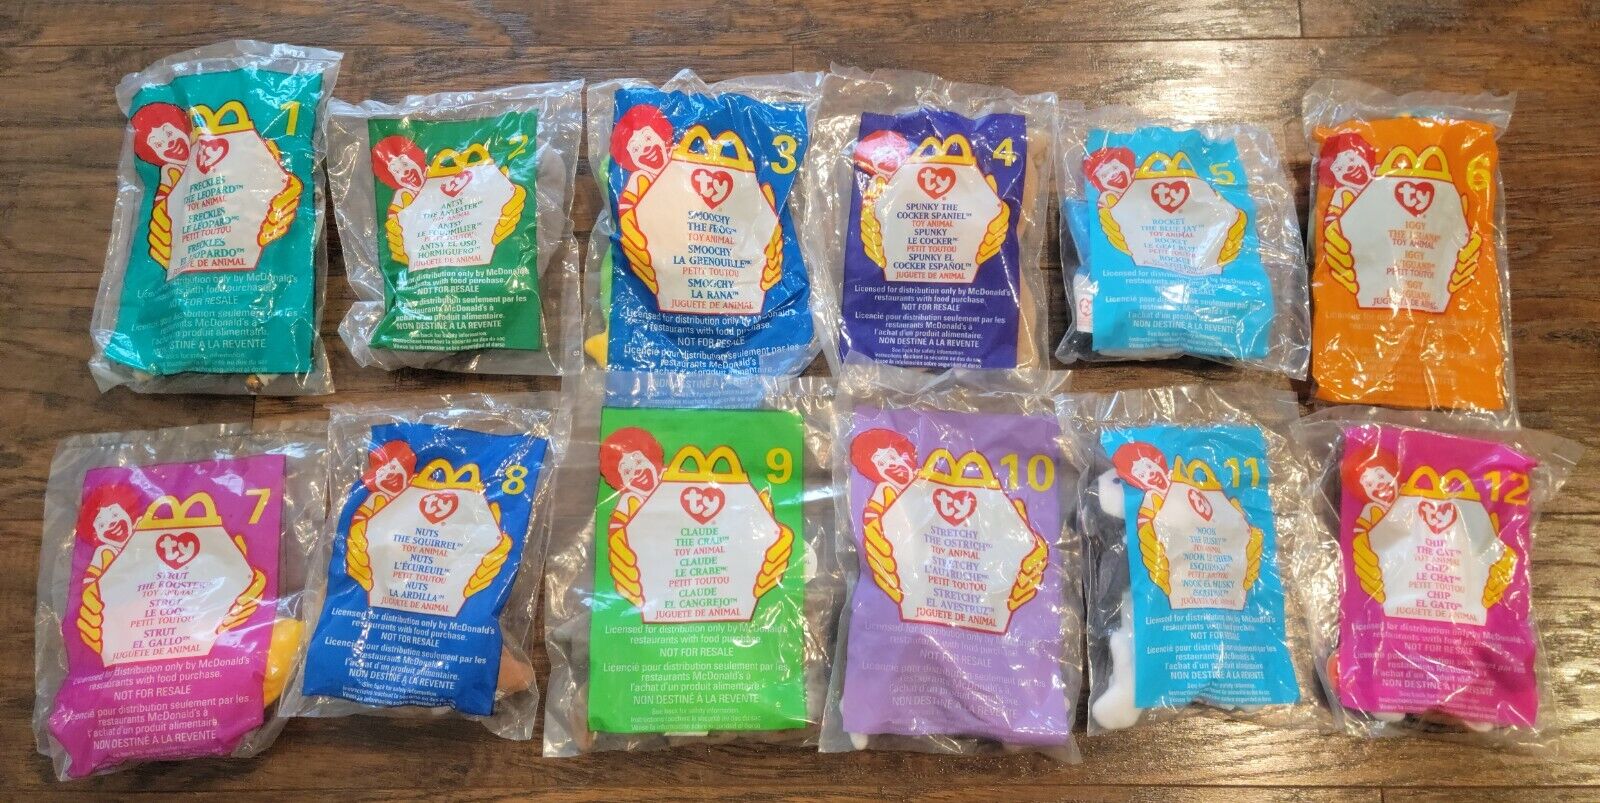 McDonalds Ty Teeny Beanie Babies 1999 12 Perfect Beanies Sealed In Original Bags Ty